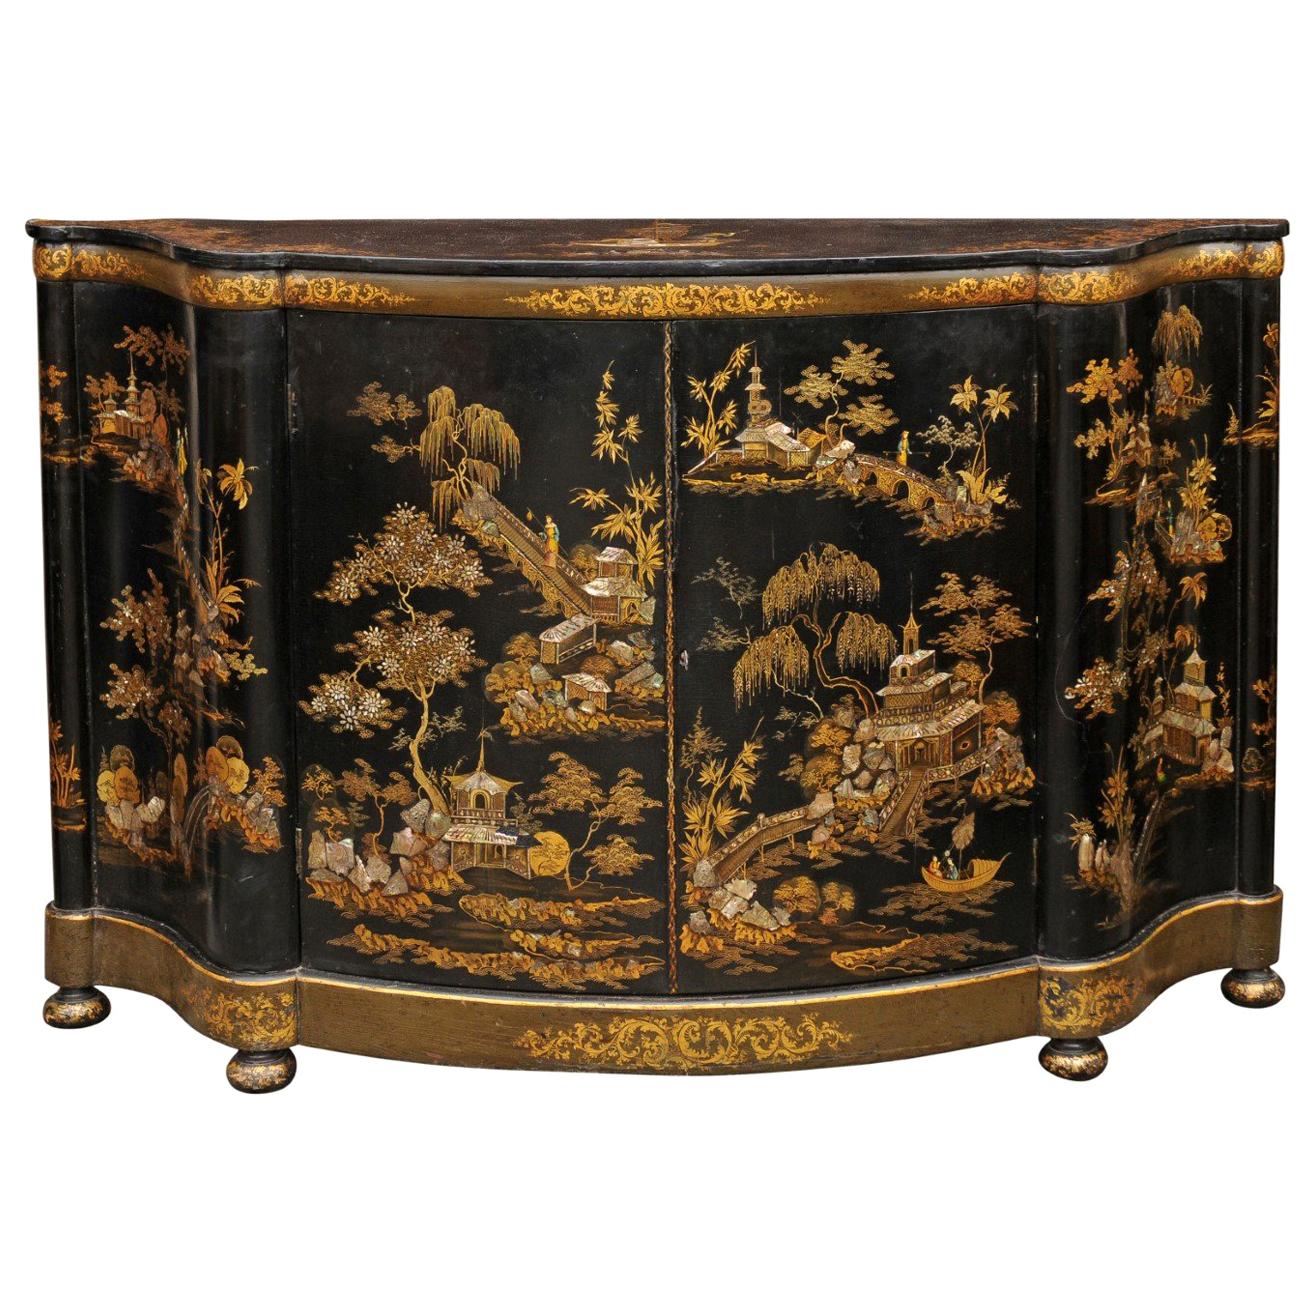 English 1880s Black Lacquered Two-Door Credenza with Gilded Chinoiserie Décor